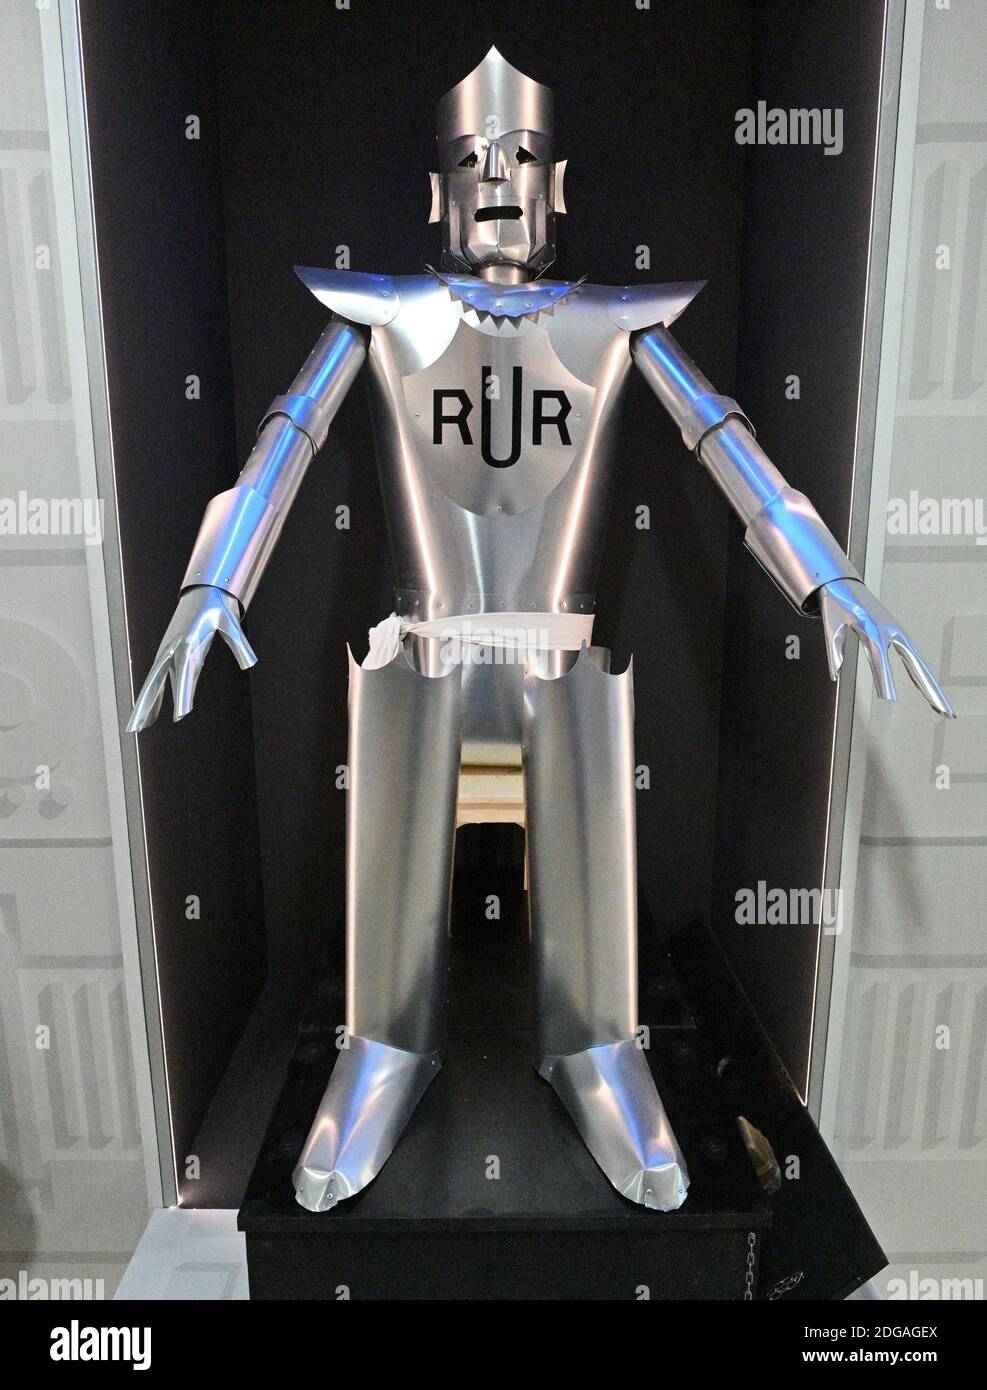 The first British robot with the letters R.U.R. inspired by Karel Capek's  play, which was presented in London in 1923, at the Robot2020 exhibition in  the Technical Museum in Brno, Czech Republic,